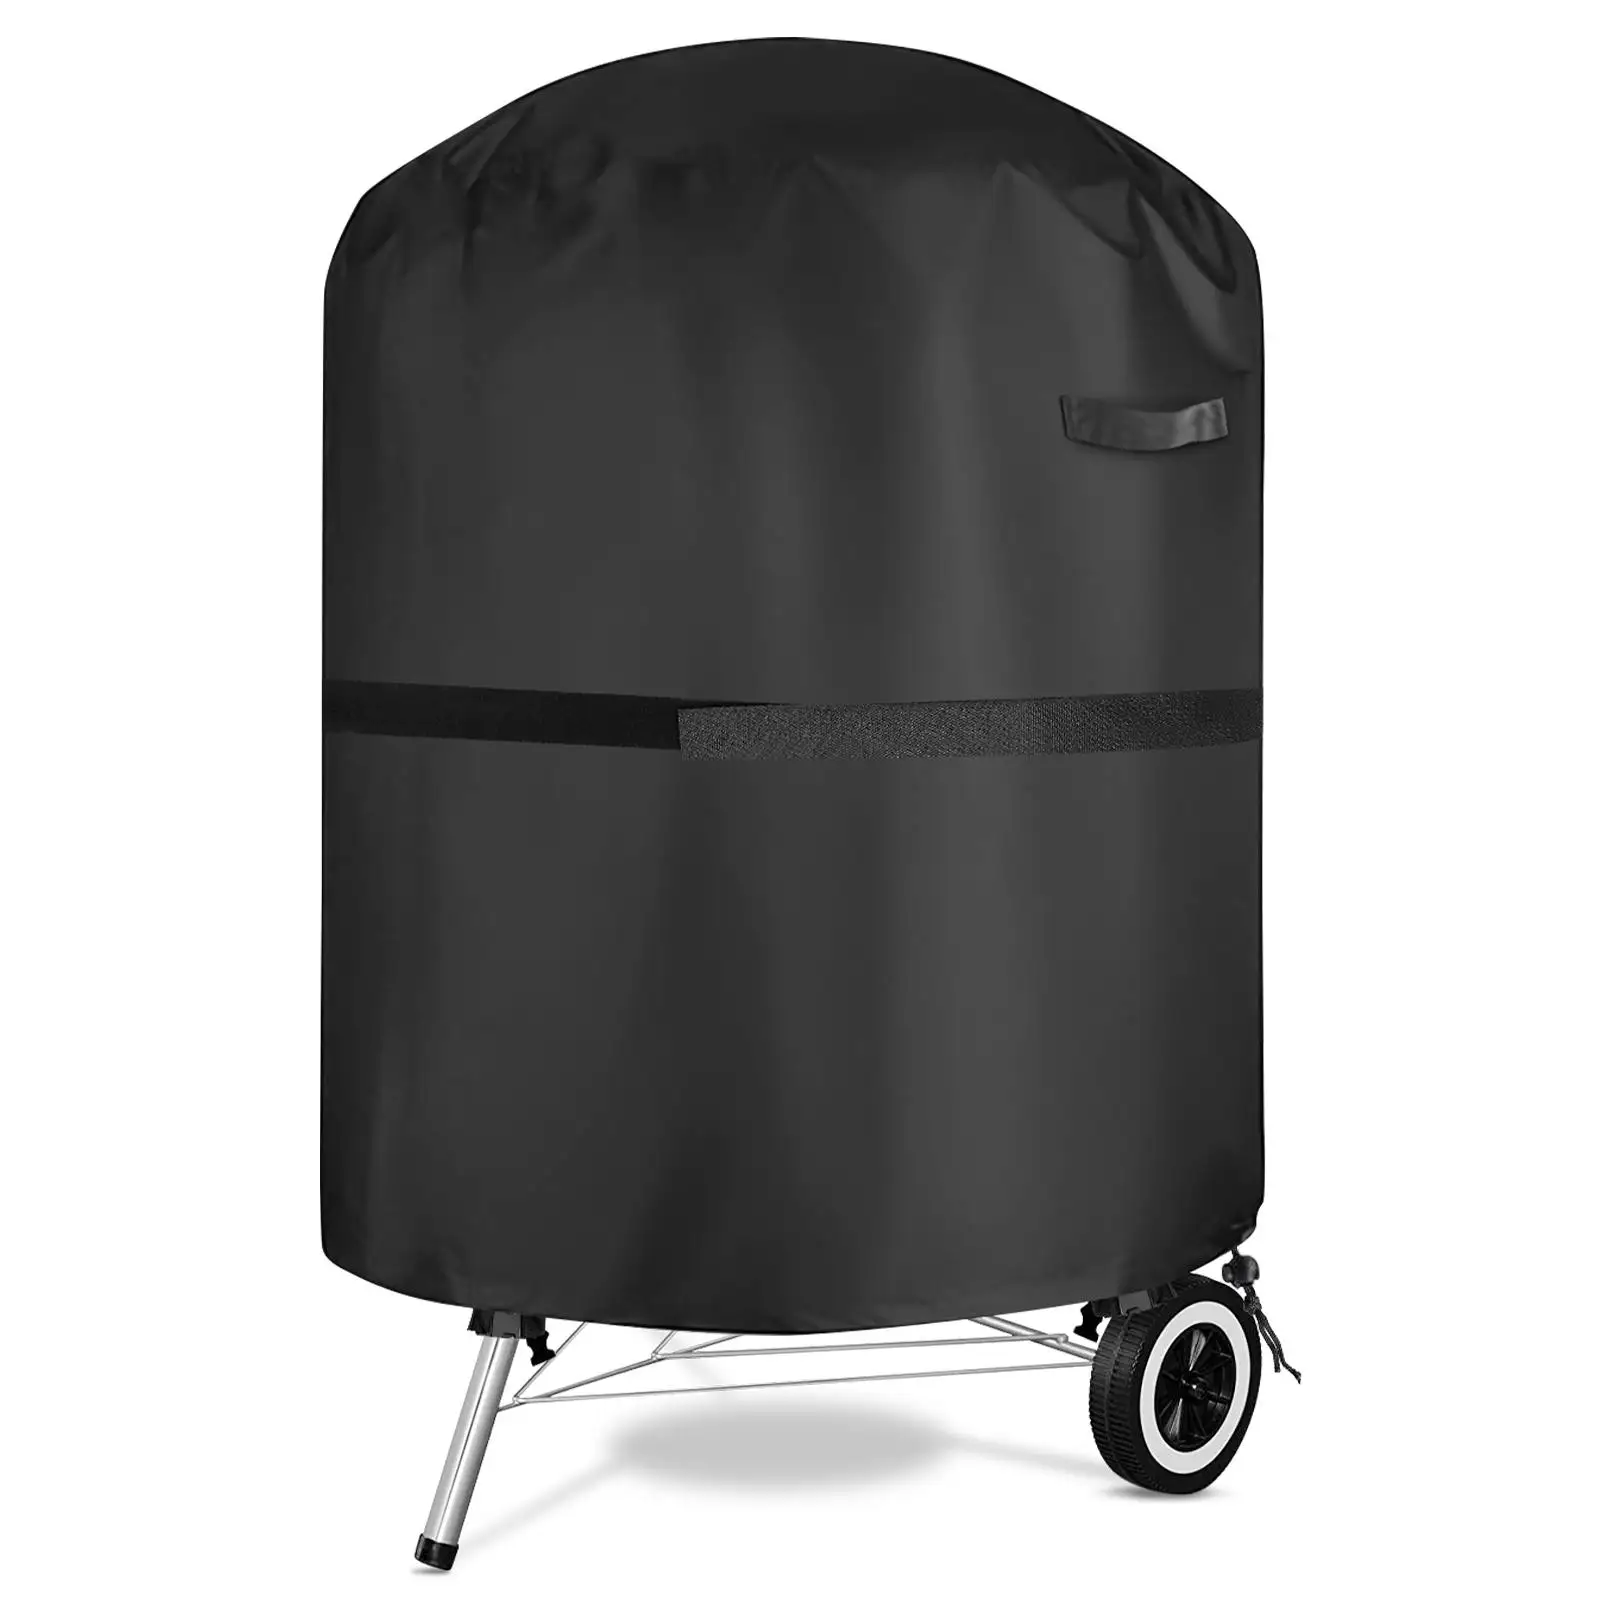 72cm Grill Covers Charcoal BBQ Cover Waterproof Heavy Duty 420D Nylon with Bag for Weber, Brinkmann, Char-Broil Jenn Air Holland